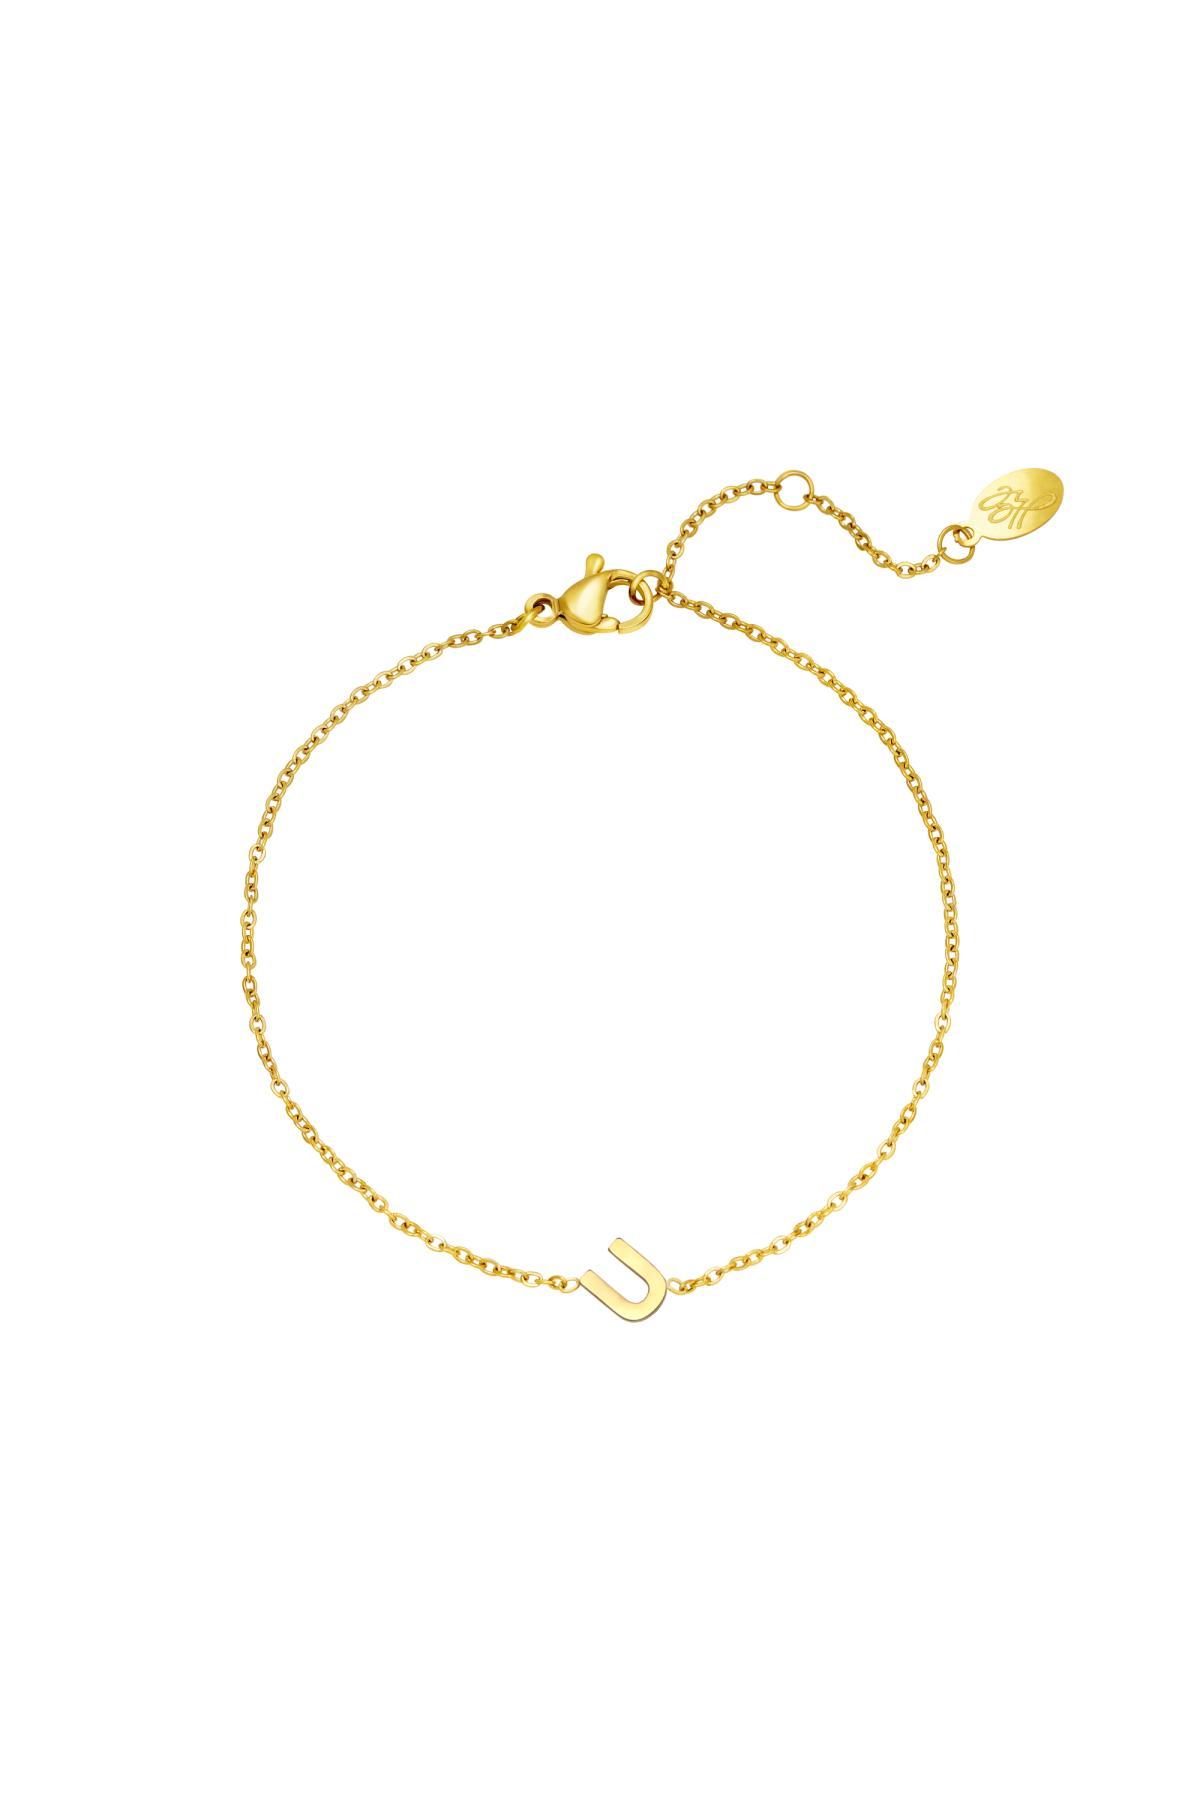 Gold / Stainless steel bracelet initial U Gold Picture10